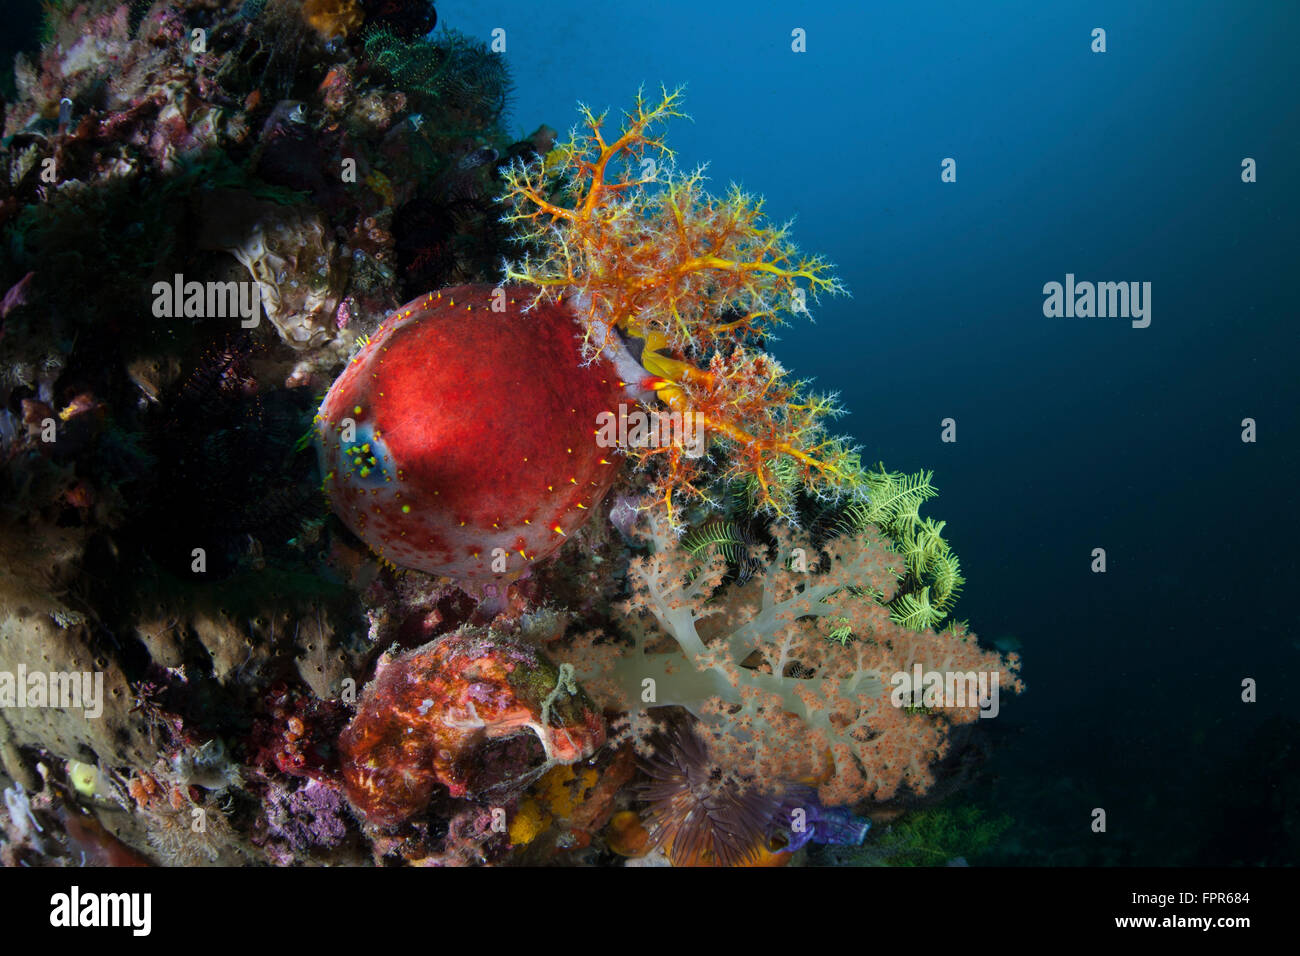 A colorful sea apple (Pseudocolochirus violaceus) clings to a reef in Komodo National Park, Indonesia. This beautiful area harbo Stock Photo